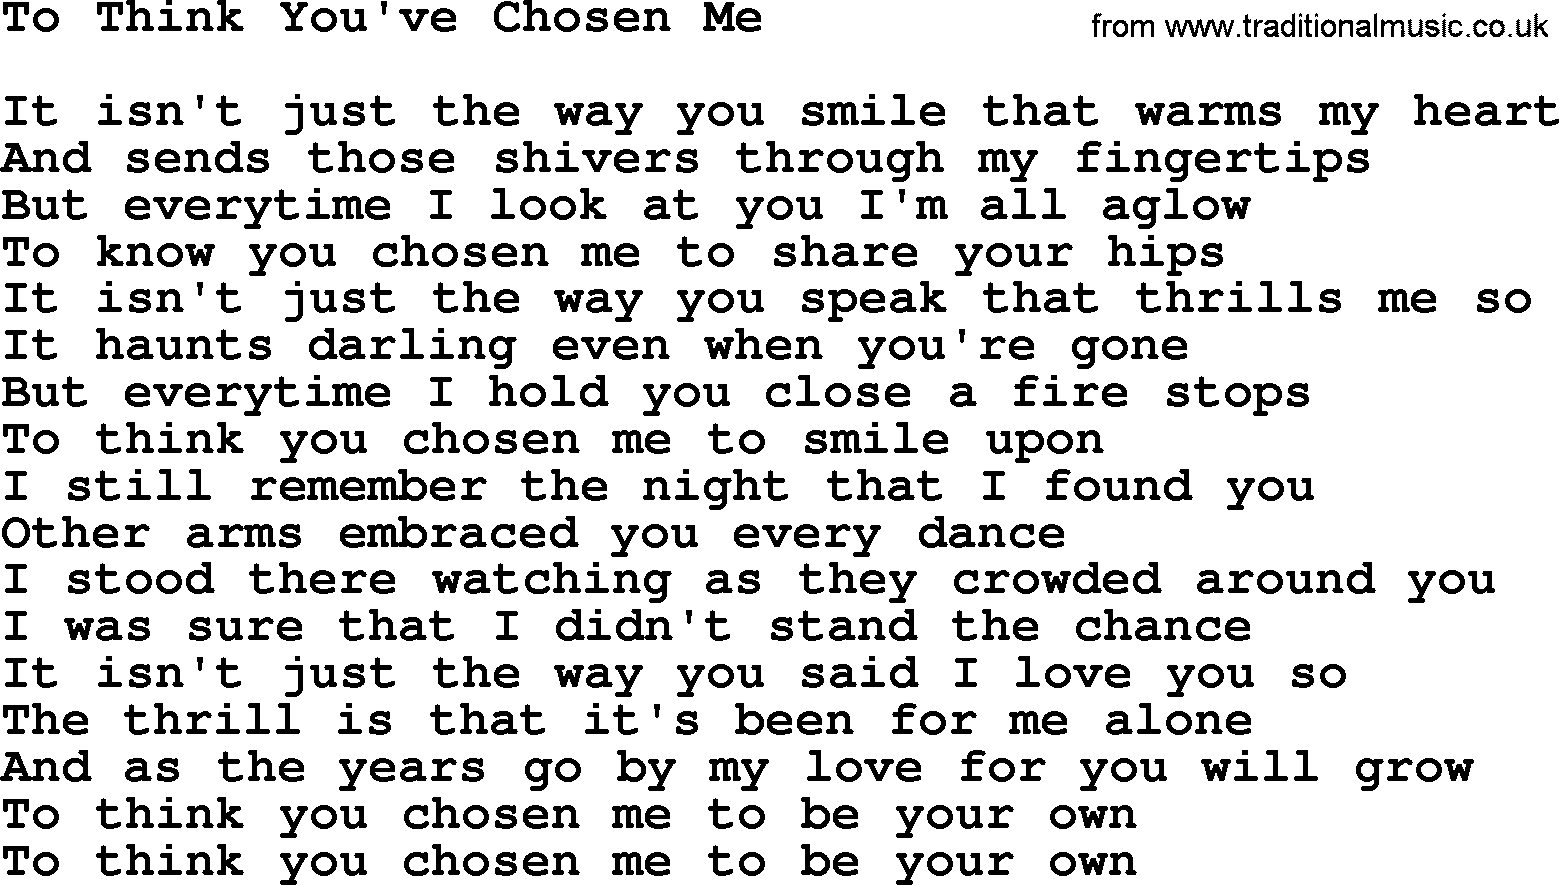 Marty Robbins song: To Think Youve Chosen Me, lyrics